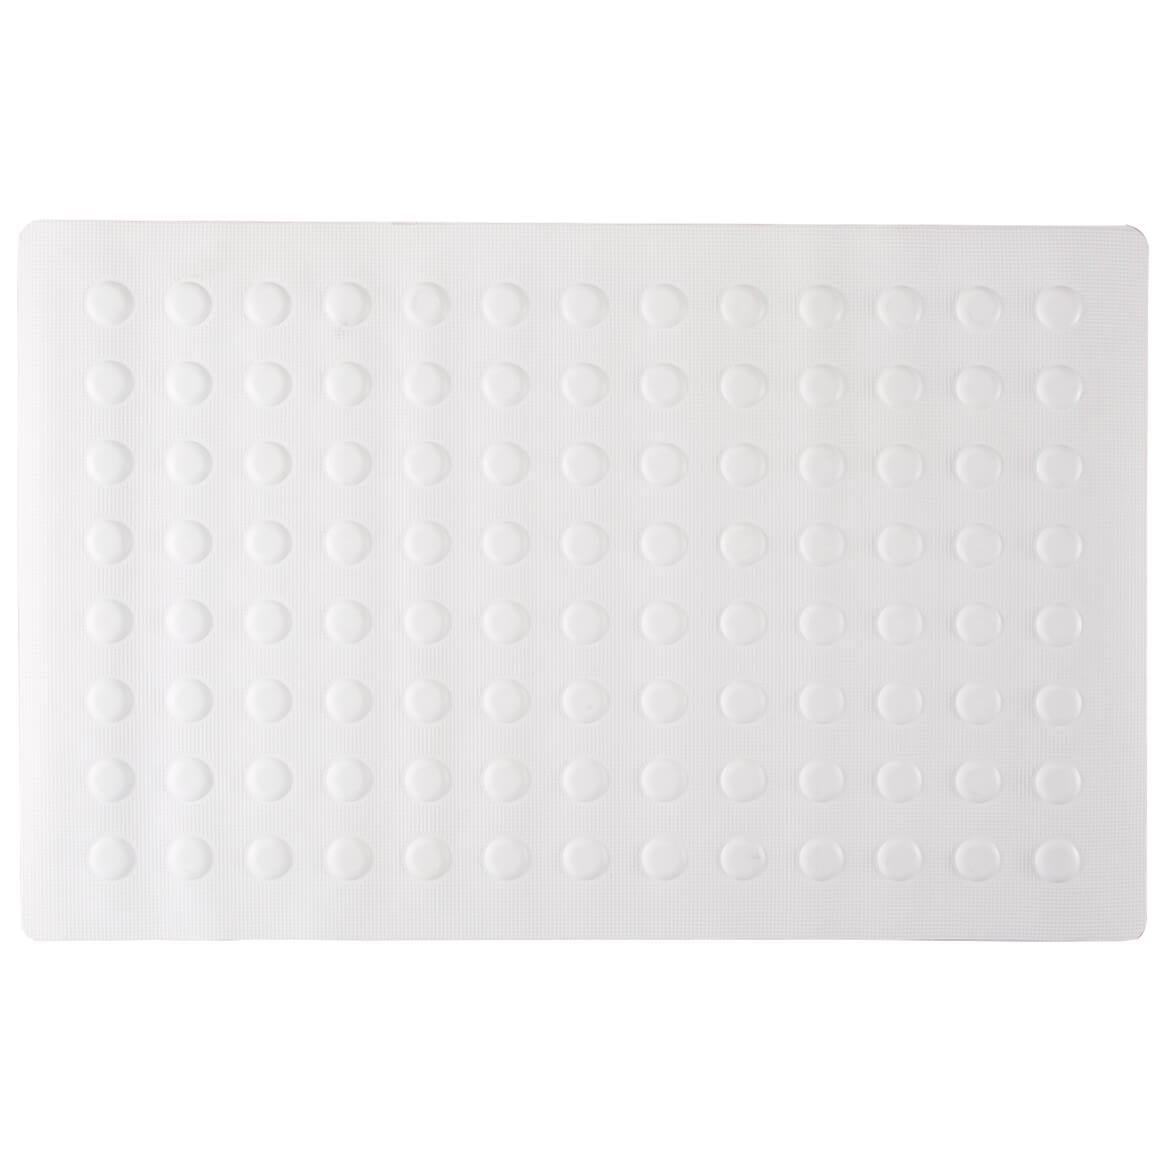 SlipX Solutions Rubber Safety Microban Bath Mat - White, 14 x 22 in - Kroger